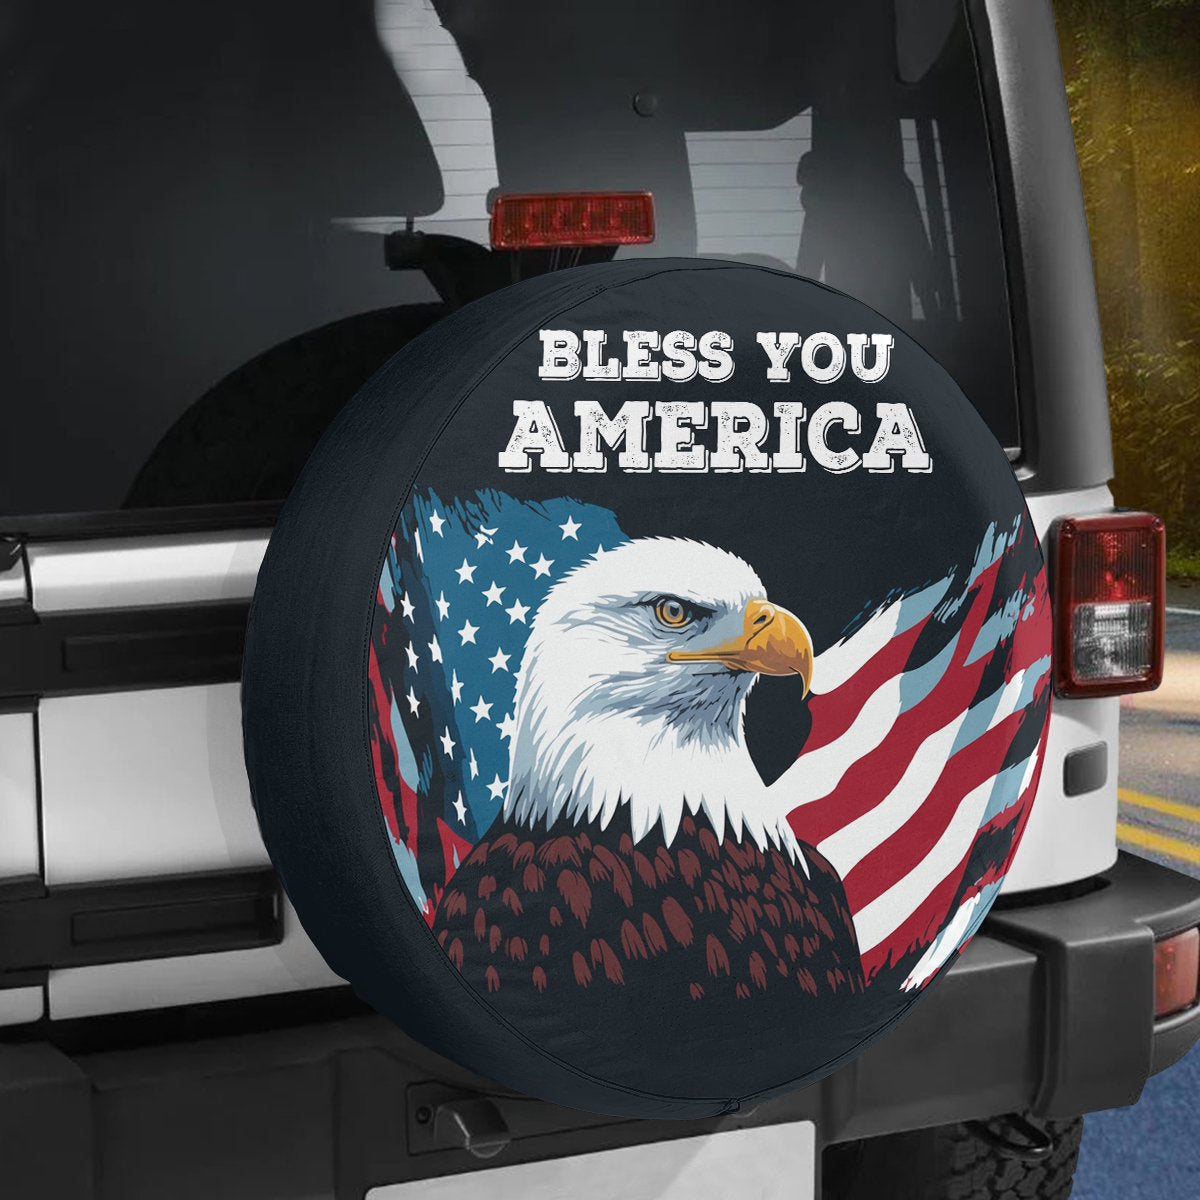 Eagle Bless You America Tire Cover - God Bless You Tire Cover - American Flag Spare Tire Cover